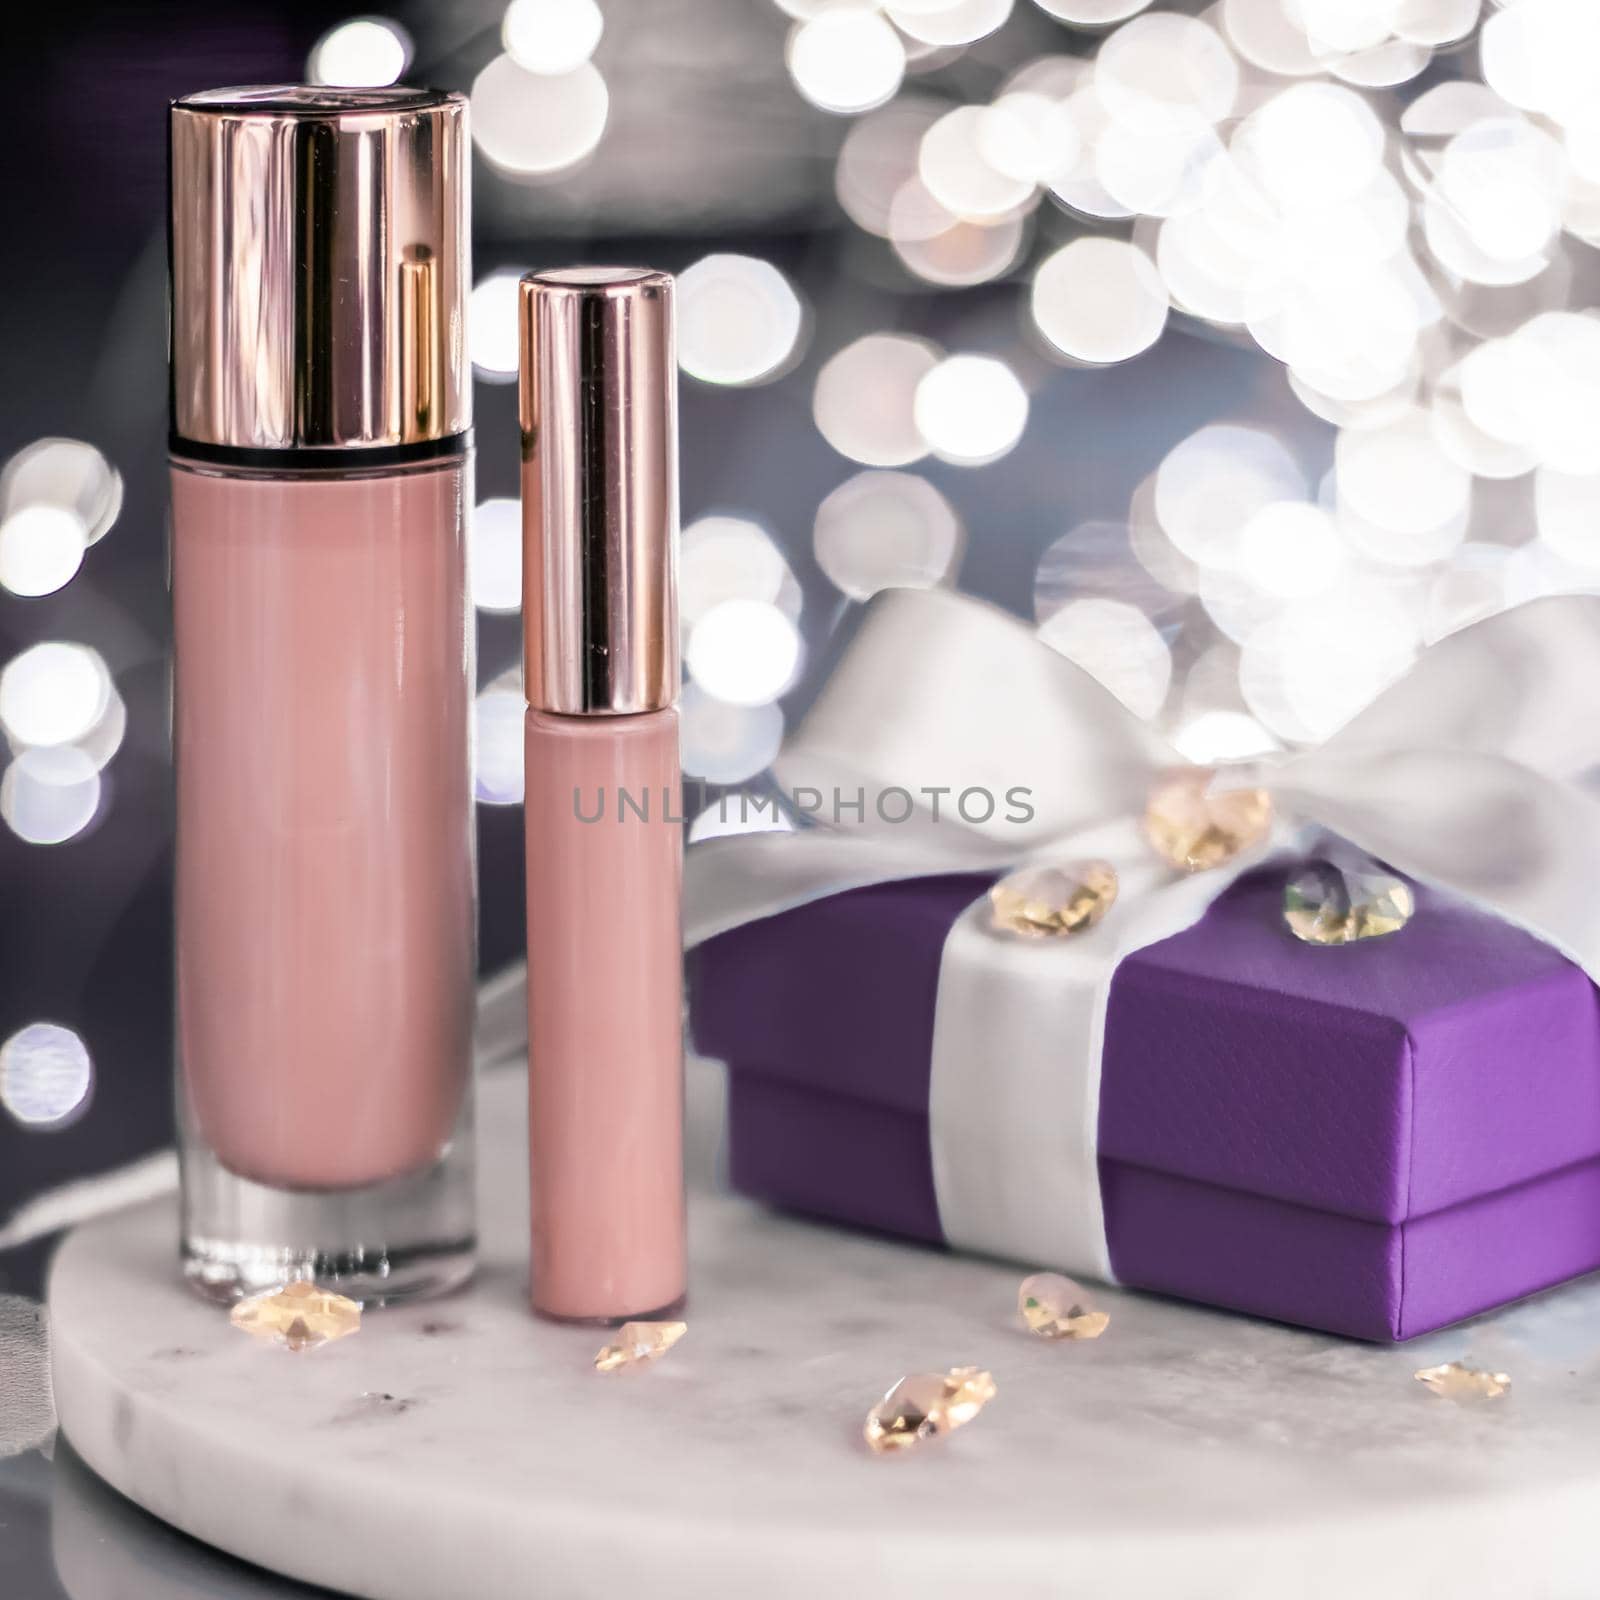 Holiday make-up foundation base, concealer and purple gift box, luxury cosmetics present and blank label products for beauty brand design by Anneleven